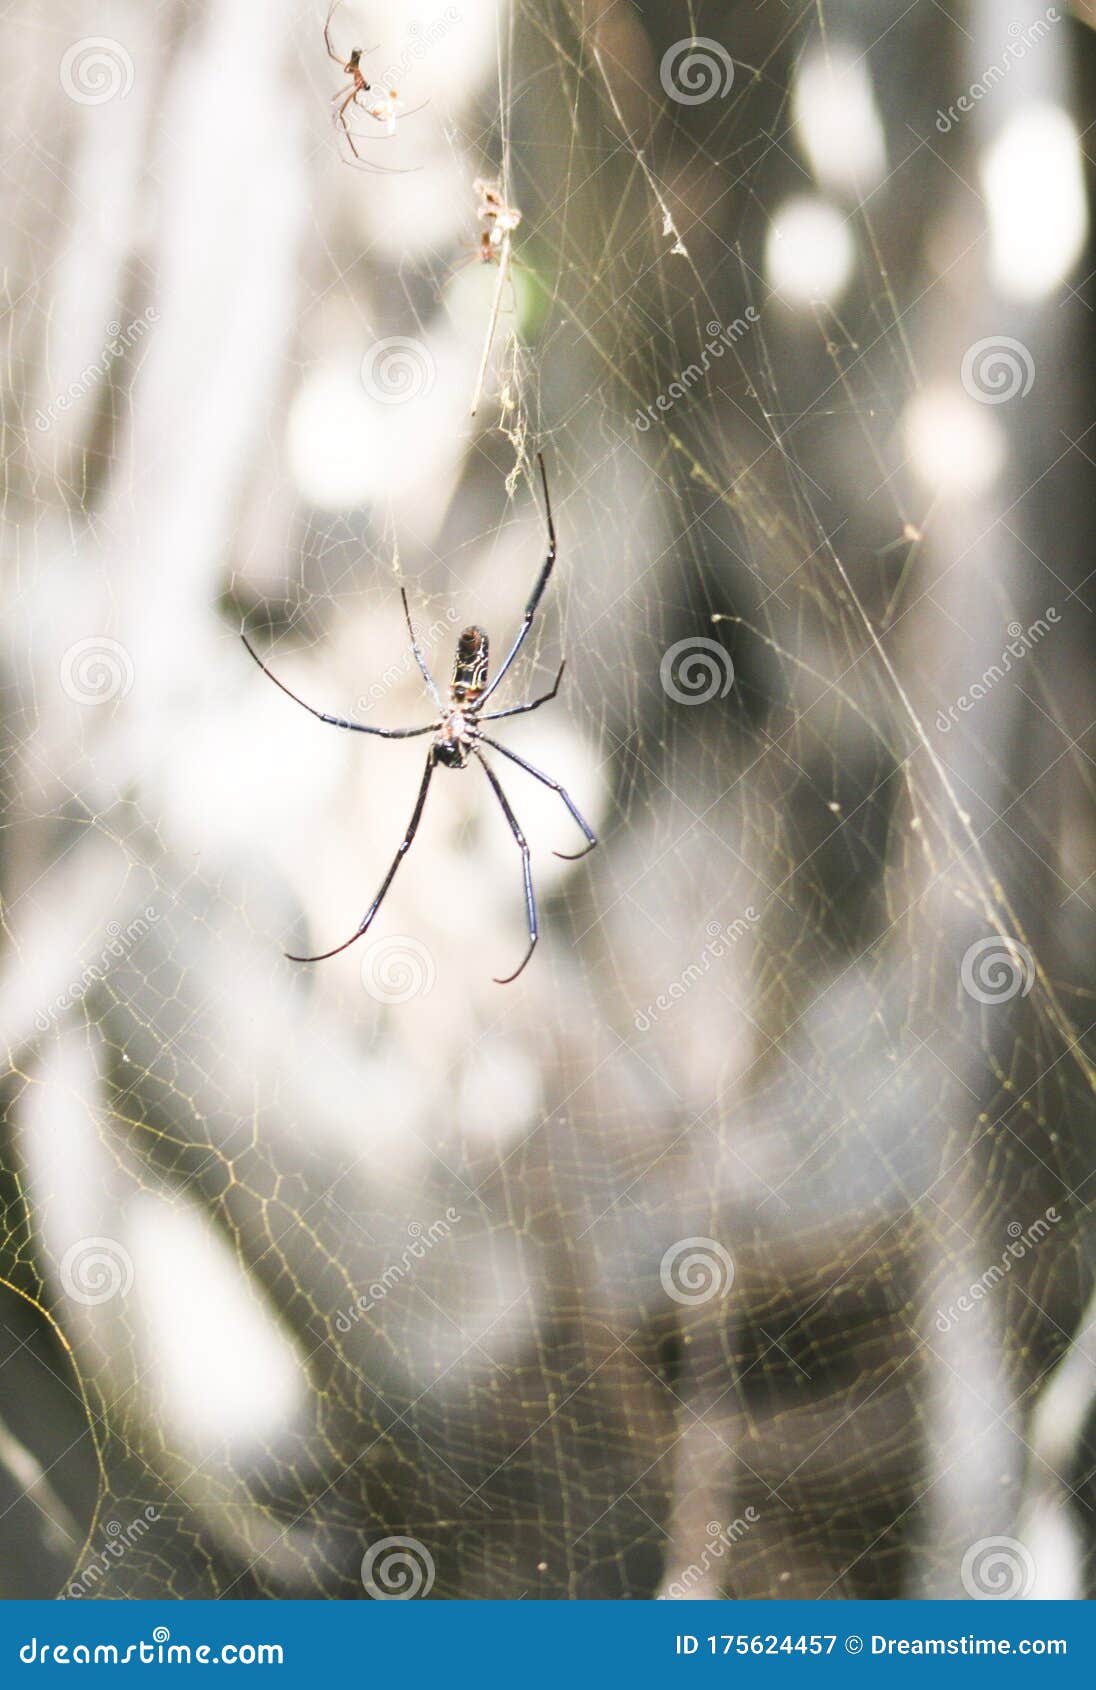 african cobweb with spider